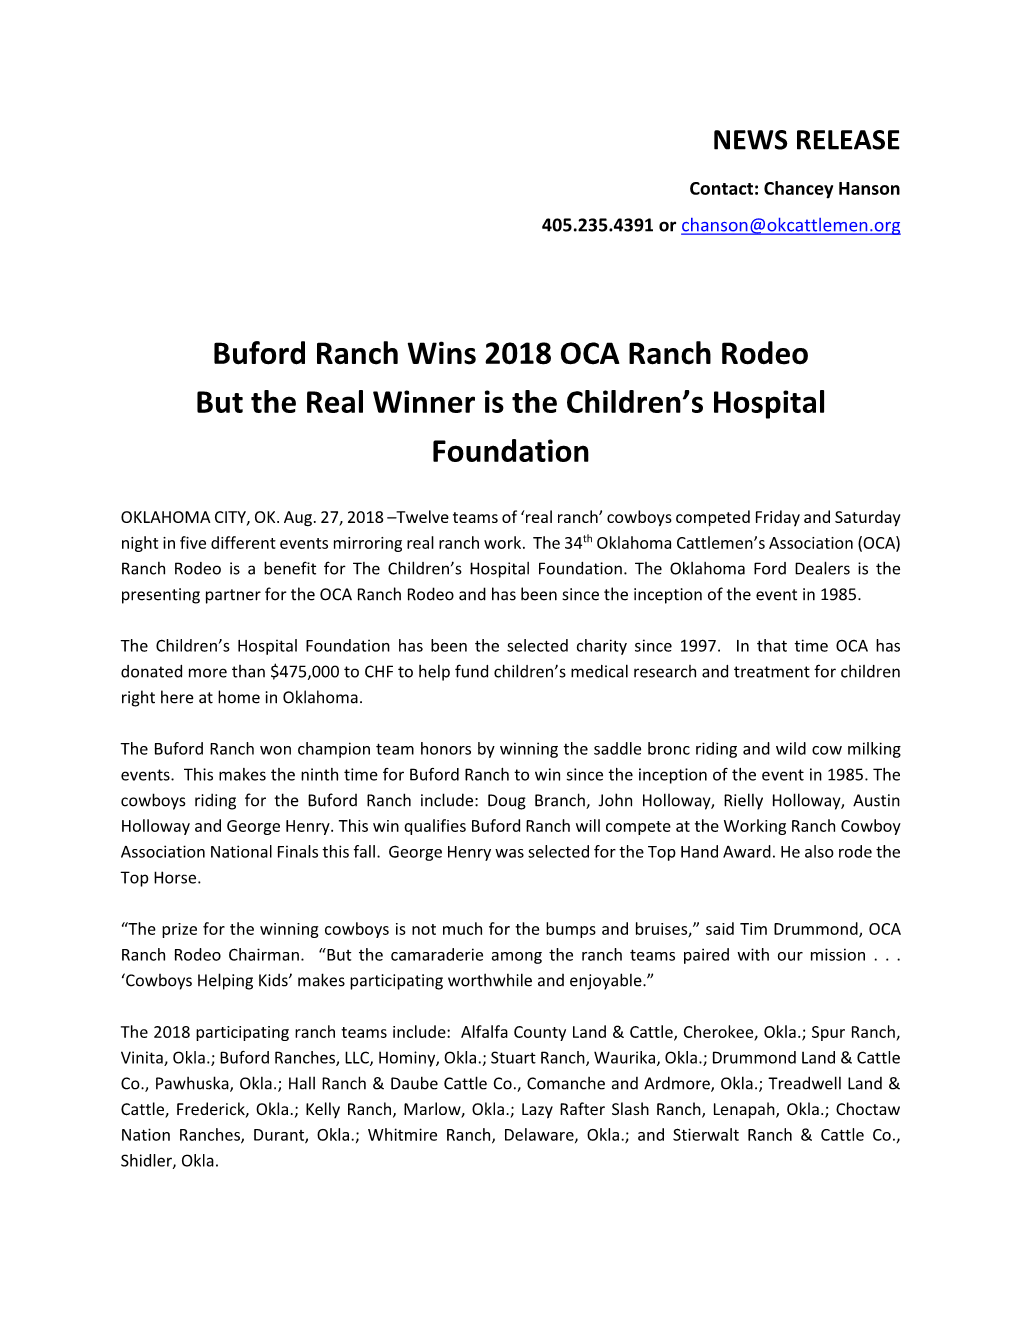 Buford Ranch Wins 2018 OCA Ranch Rodeo but the Real Winner Is the Children's Hospital Foundation